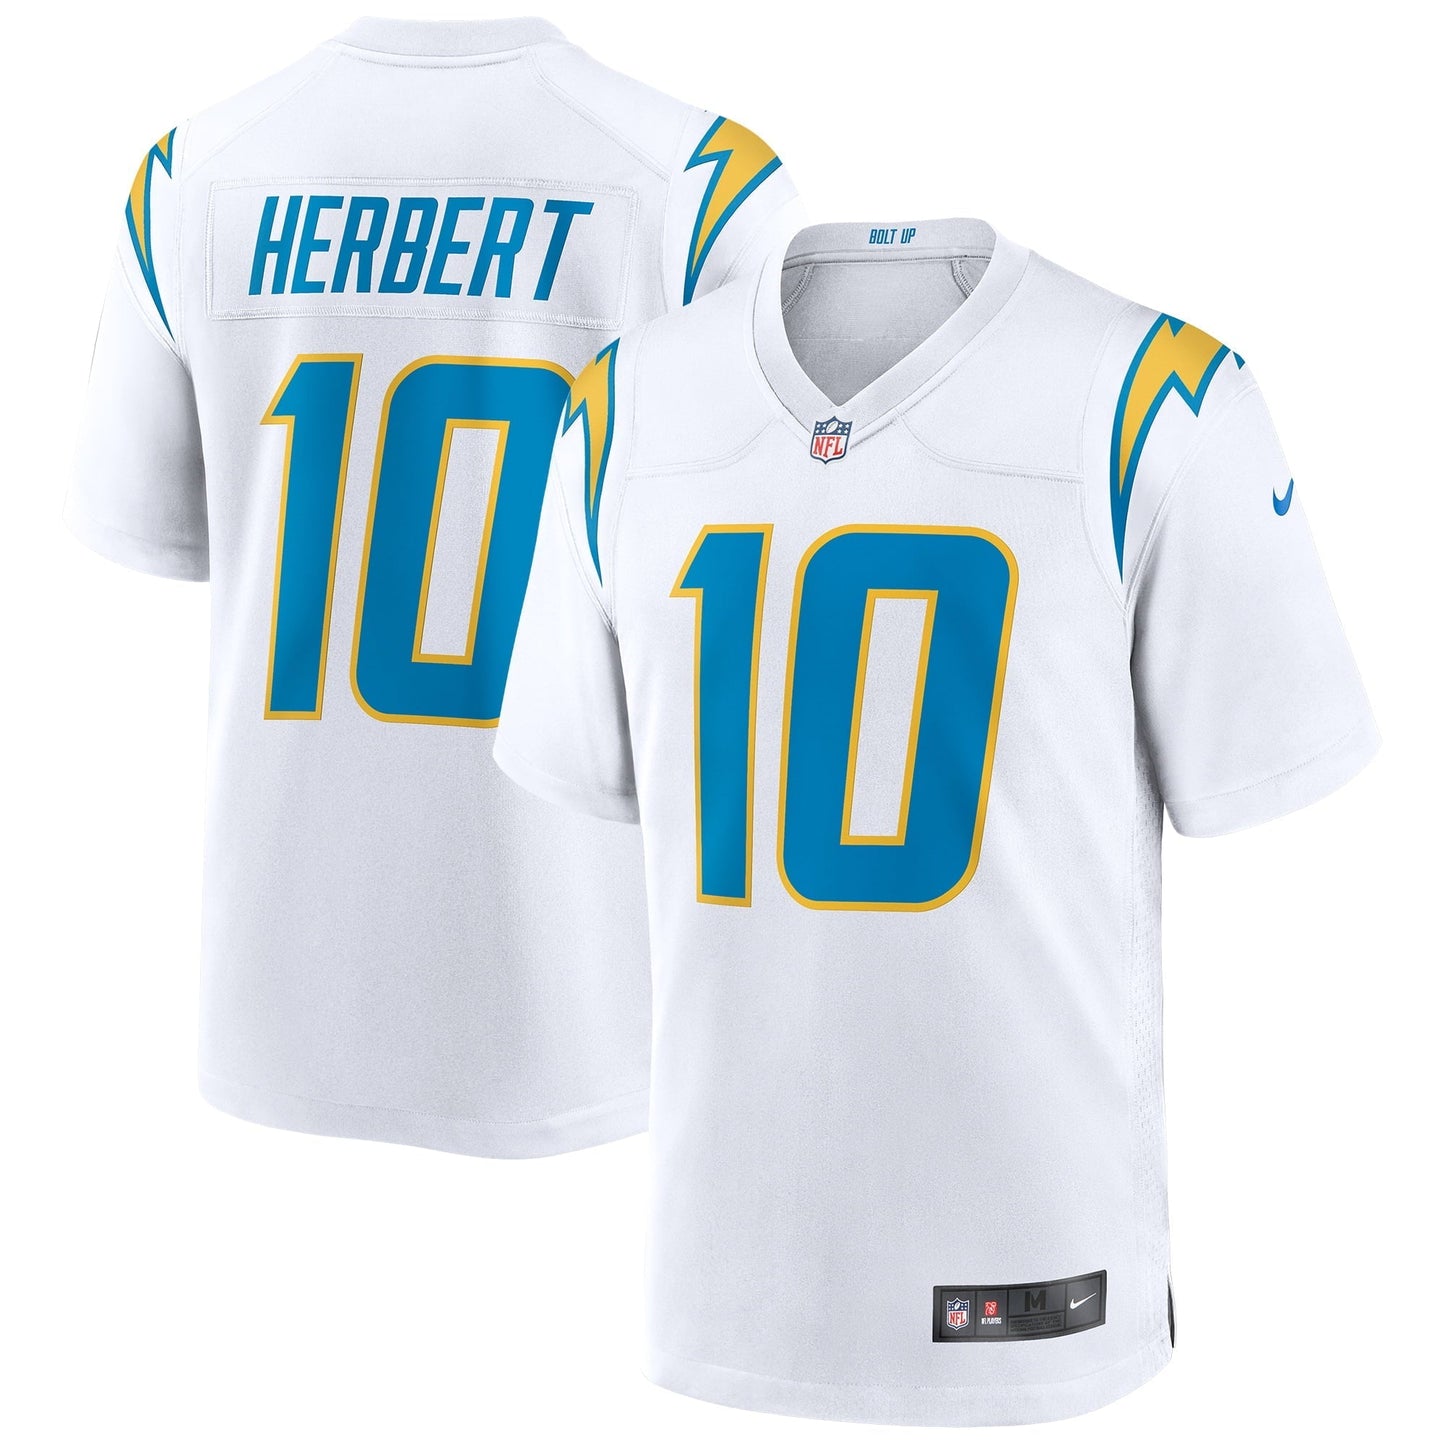 Men's Nike Justin Herbert White Los Angeles Chargers Game Jersey